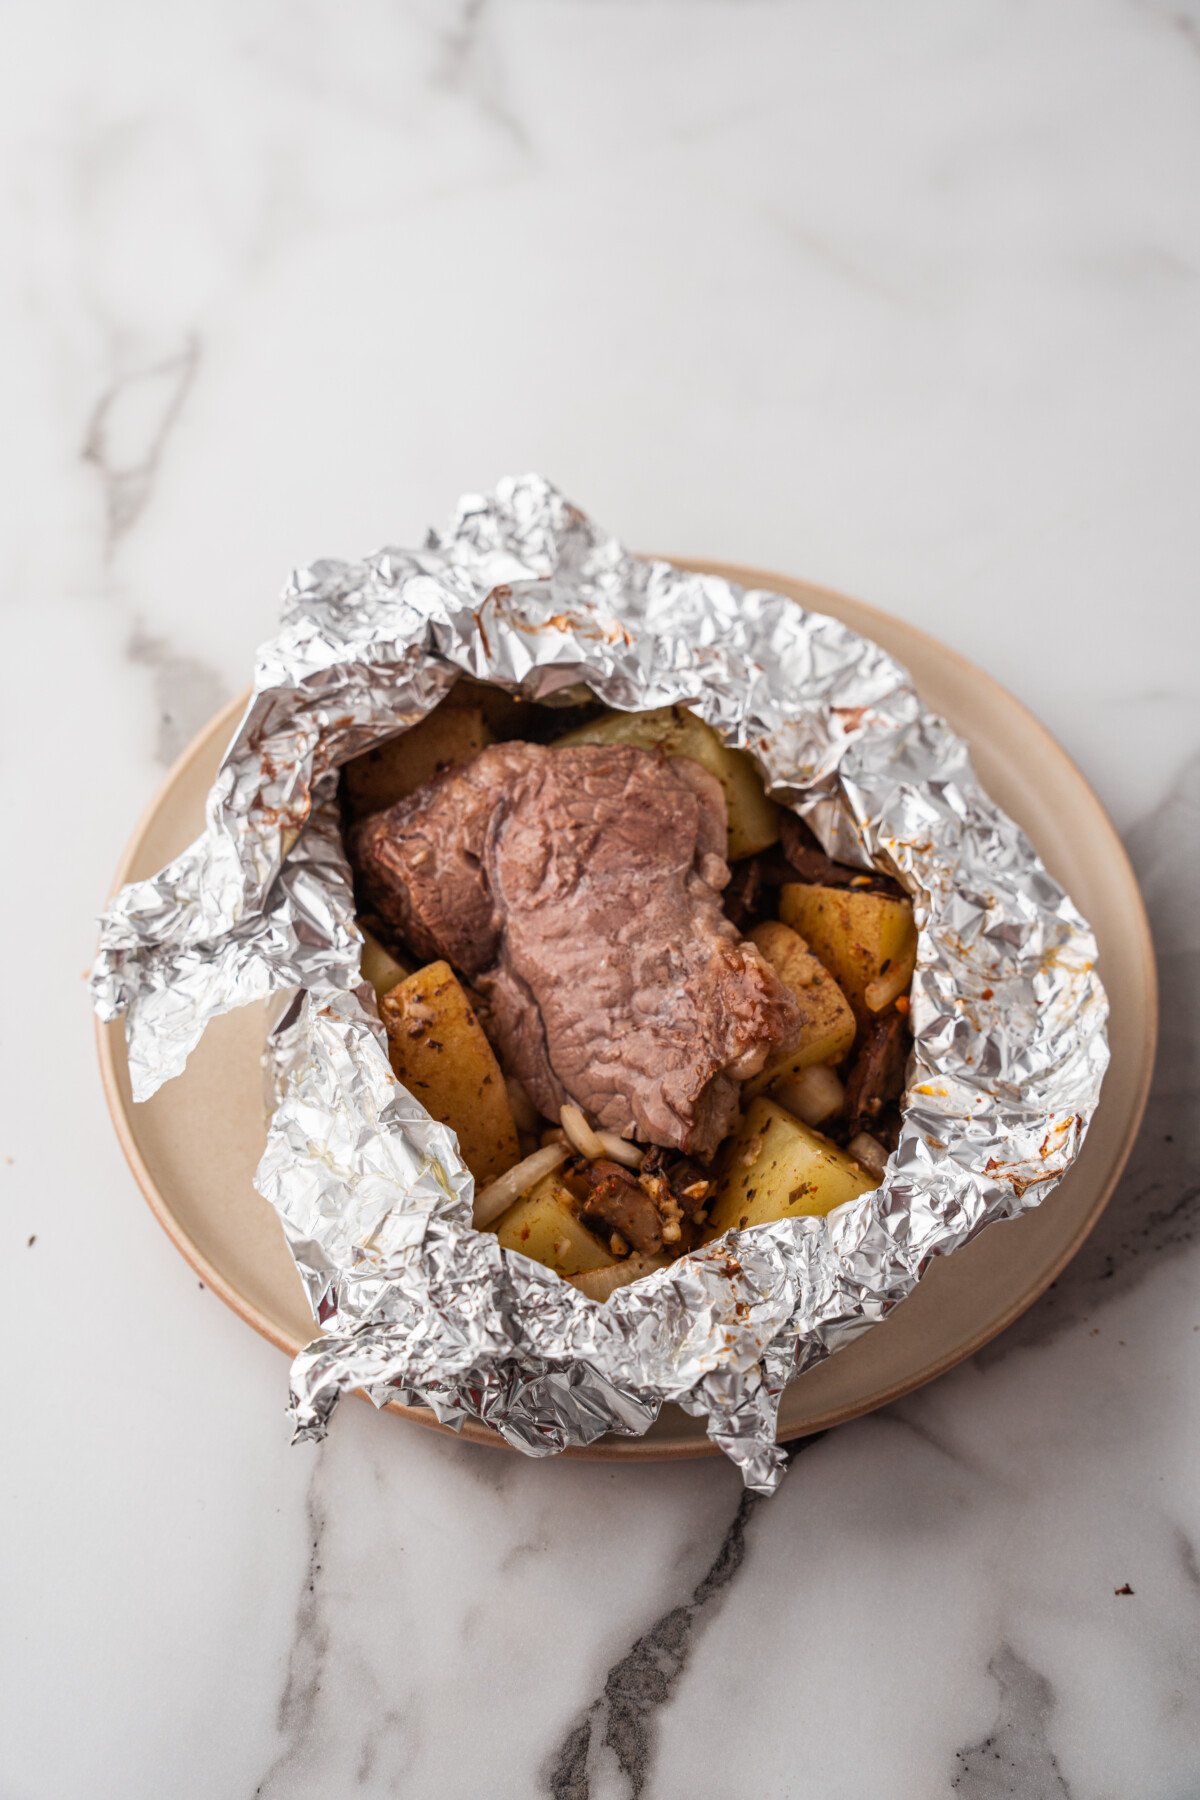 How To Cook Steak In The Oven With Foil 